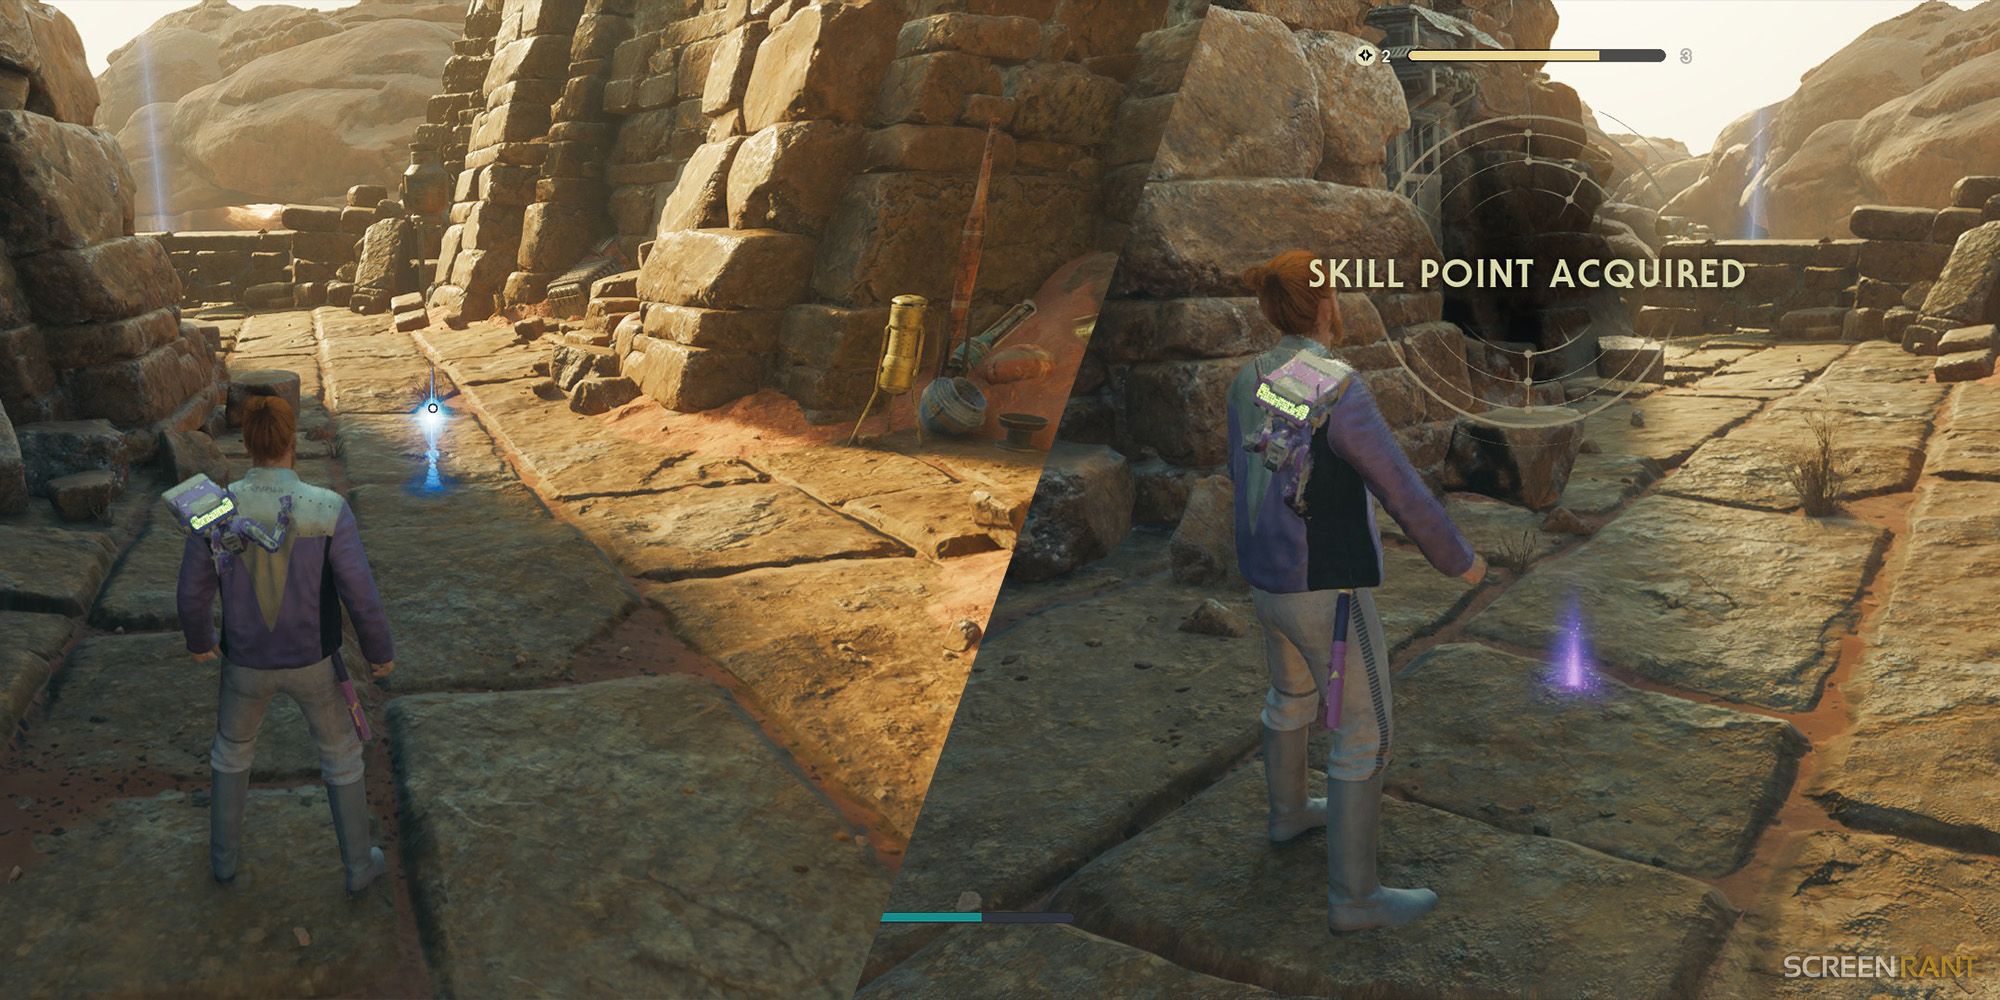 screenshot: left: player approaching an unobtained blue force essence, right: skill point acquired notification in star wars jedi survivor